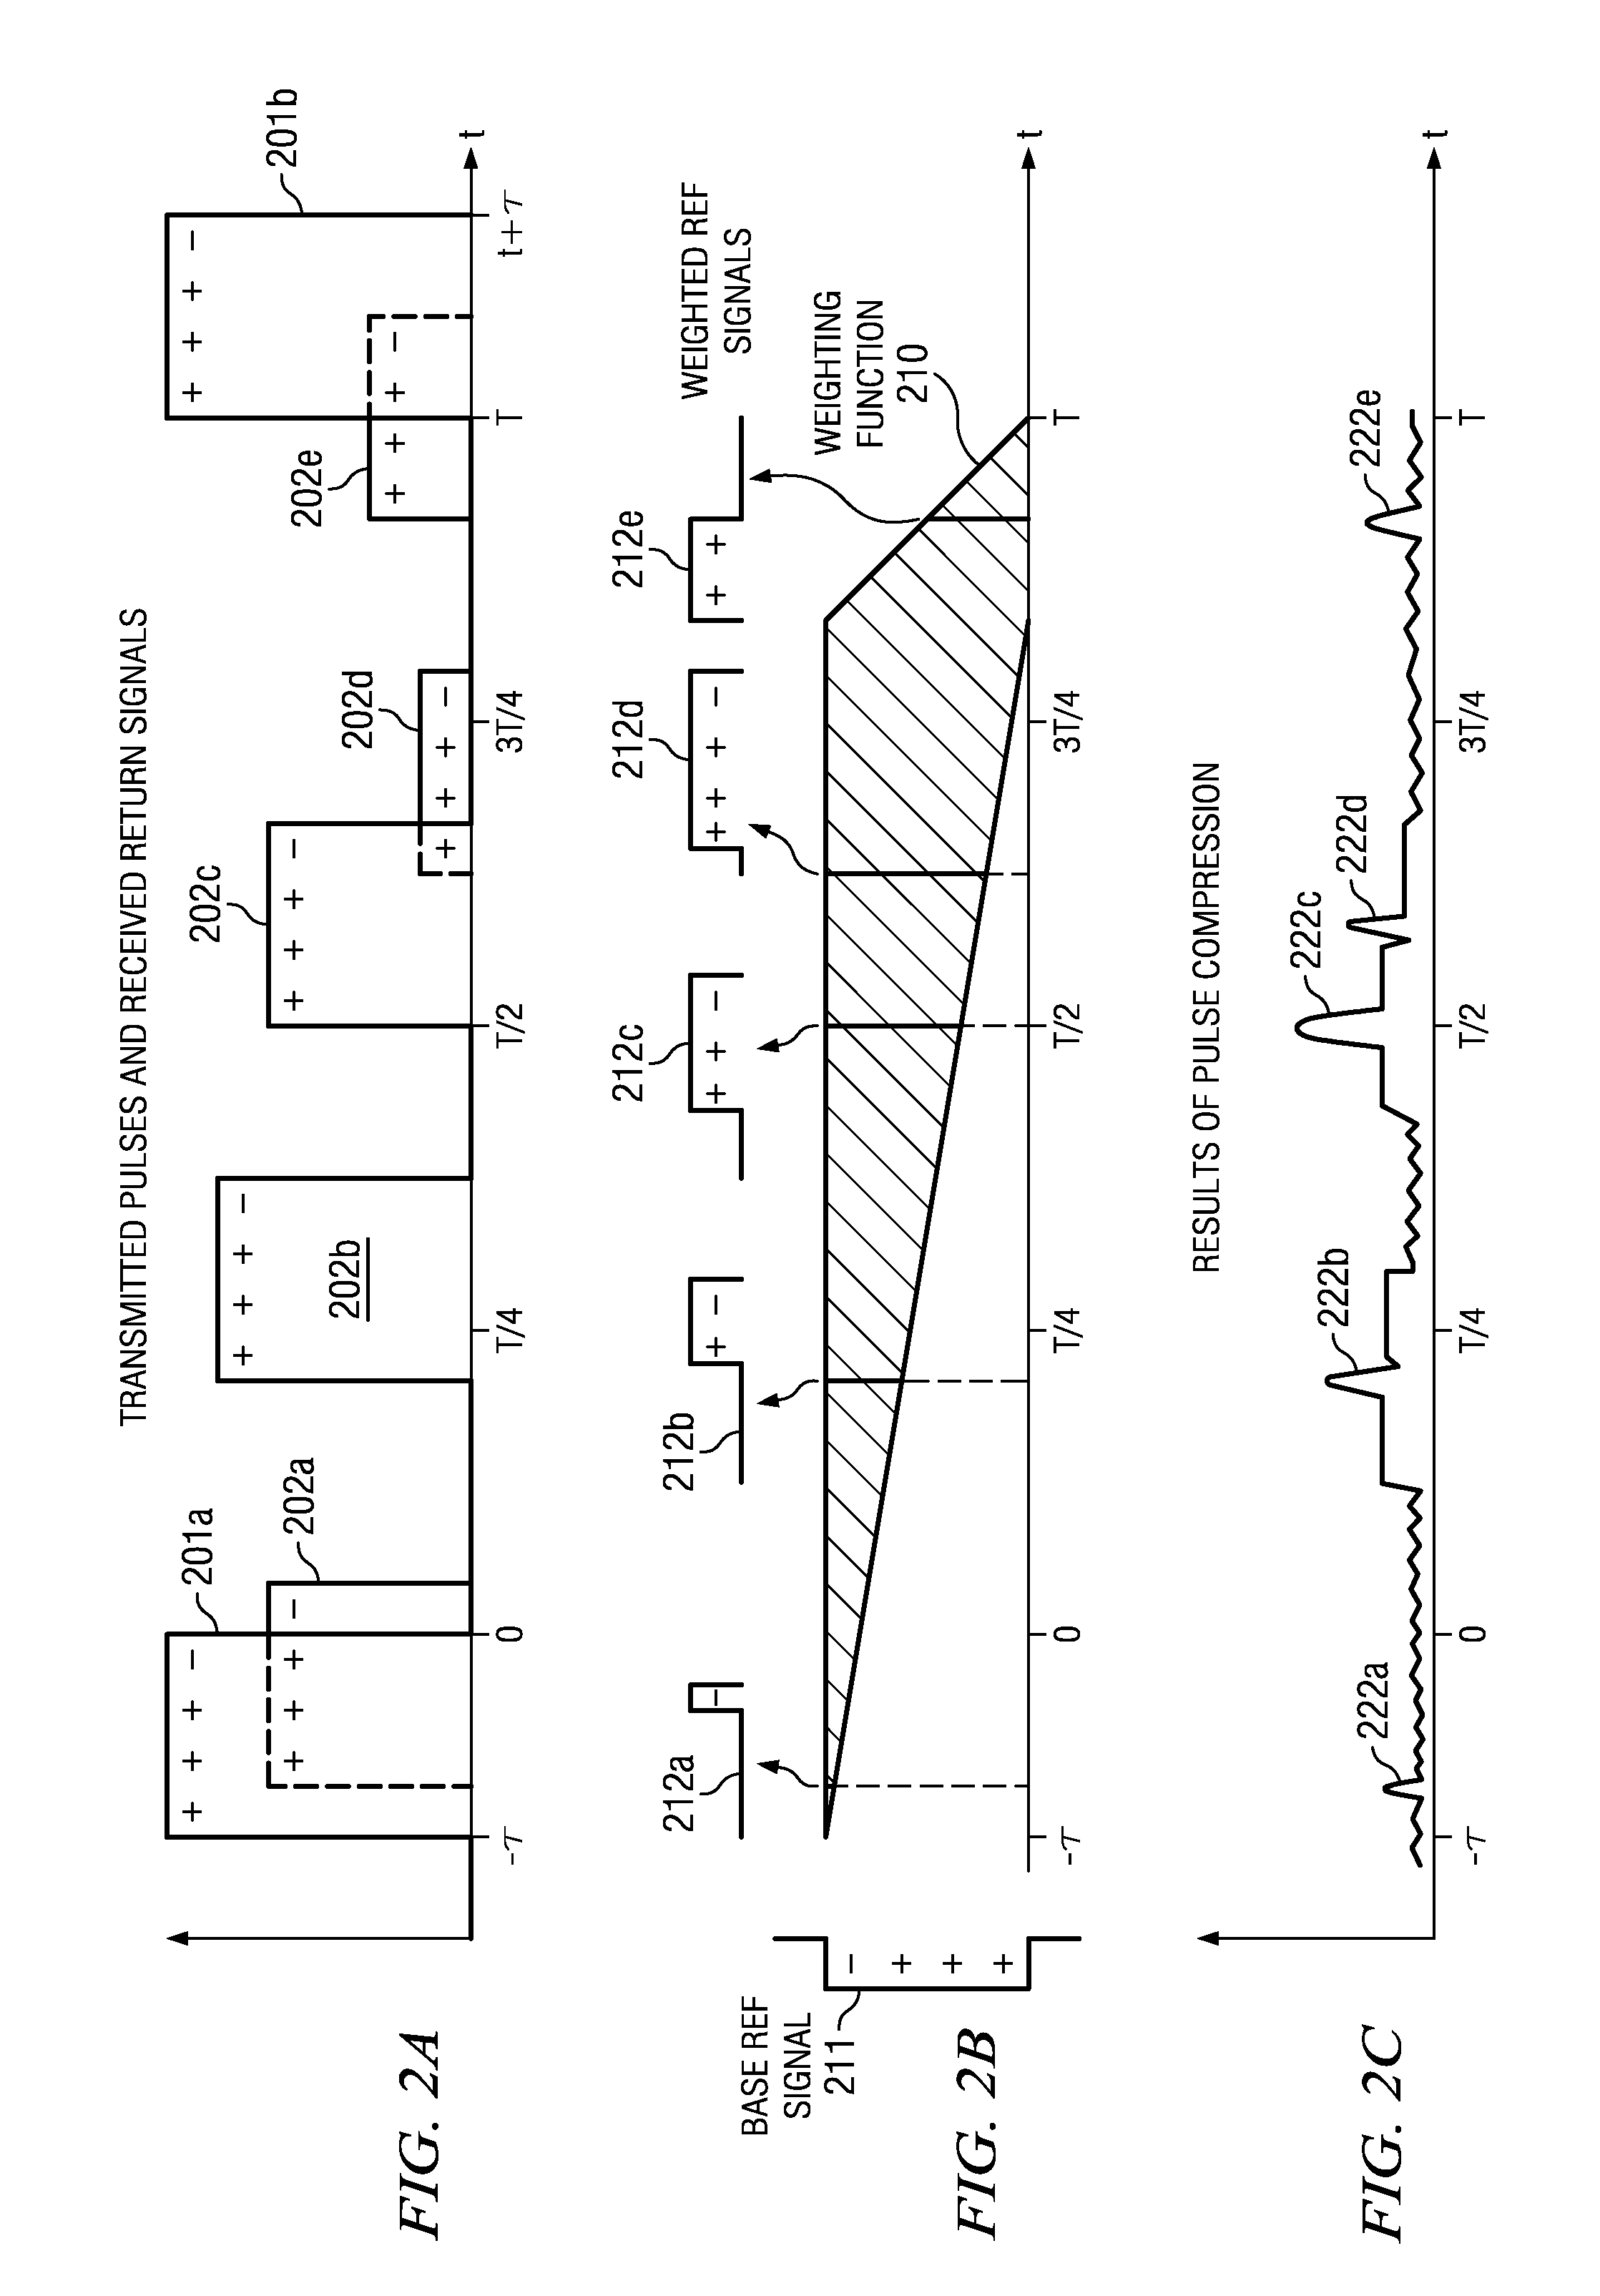 High Duty Cycle Radar with Near/Far Pulse Compression Interference Mitigation